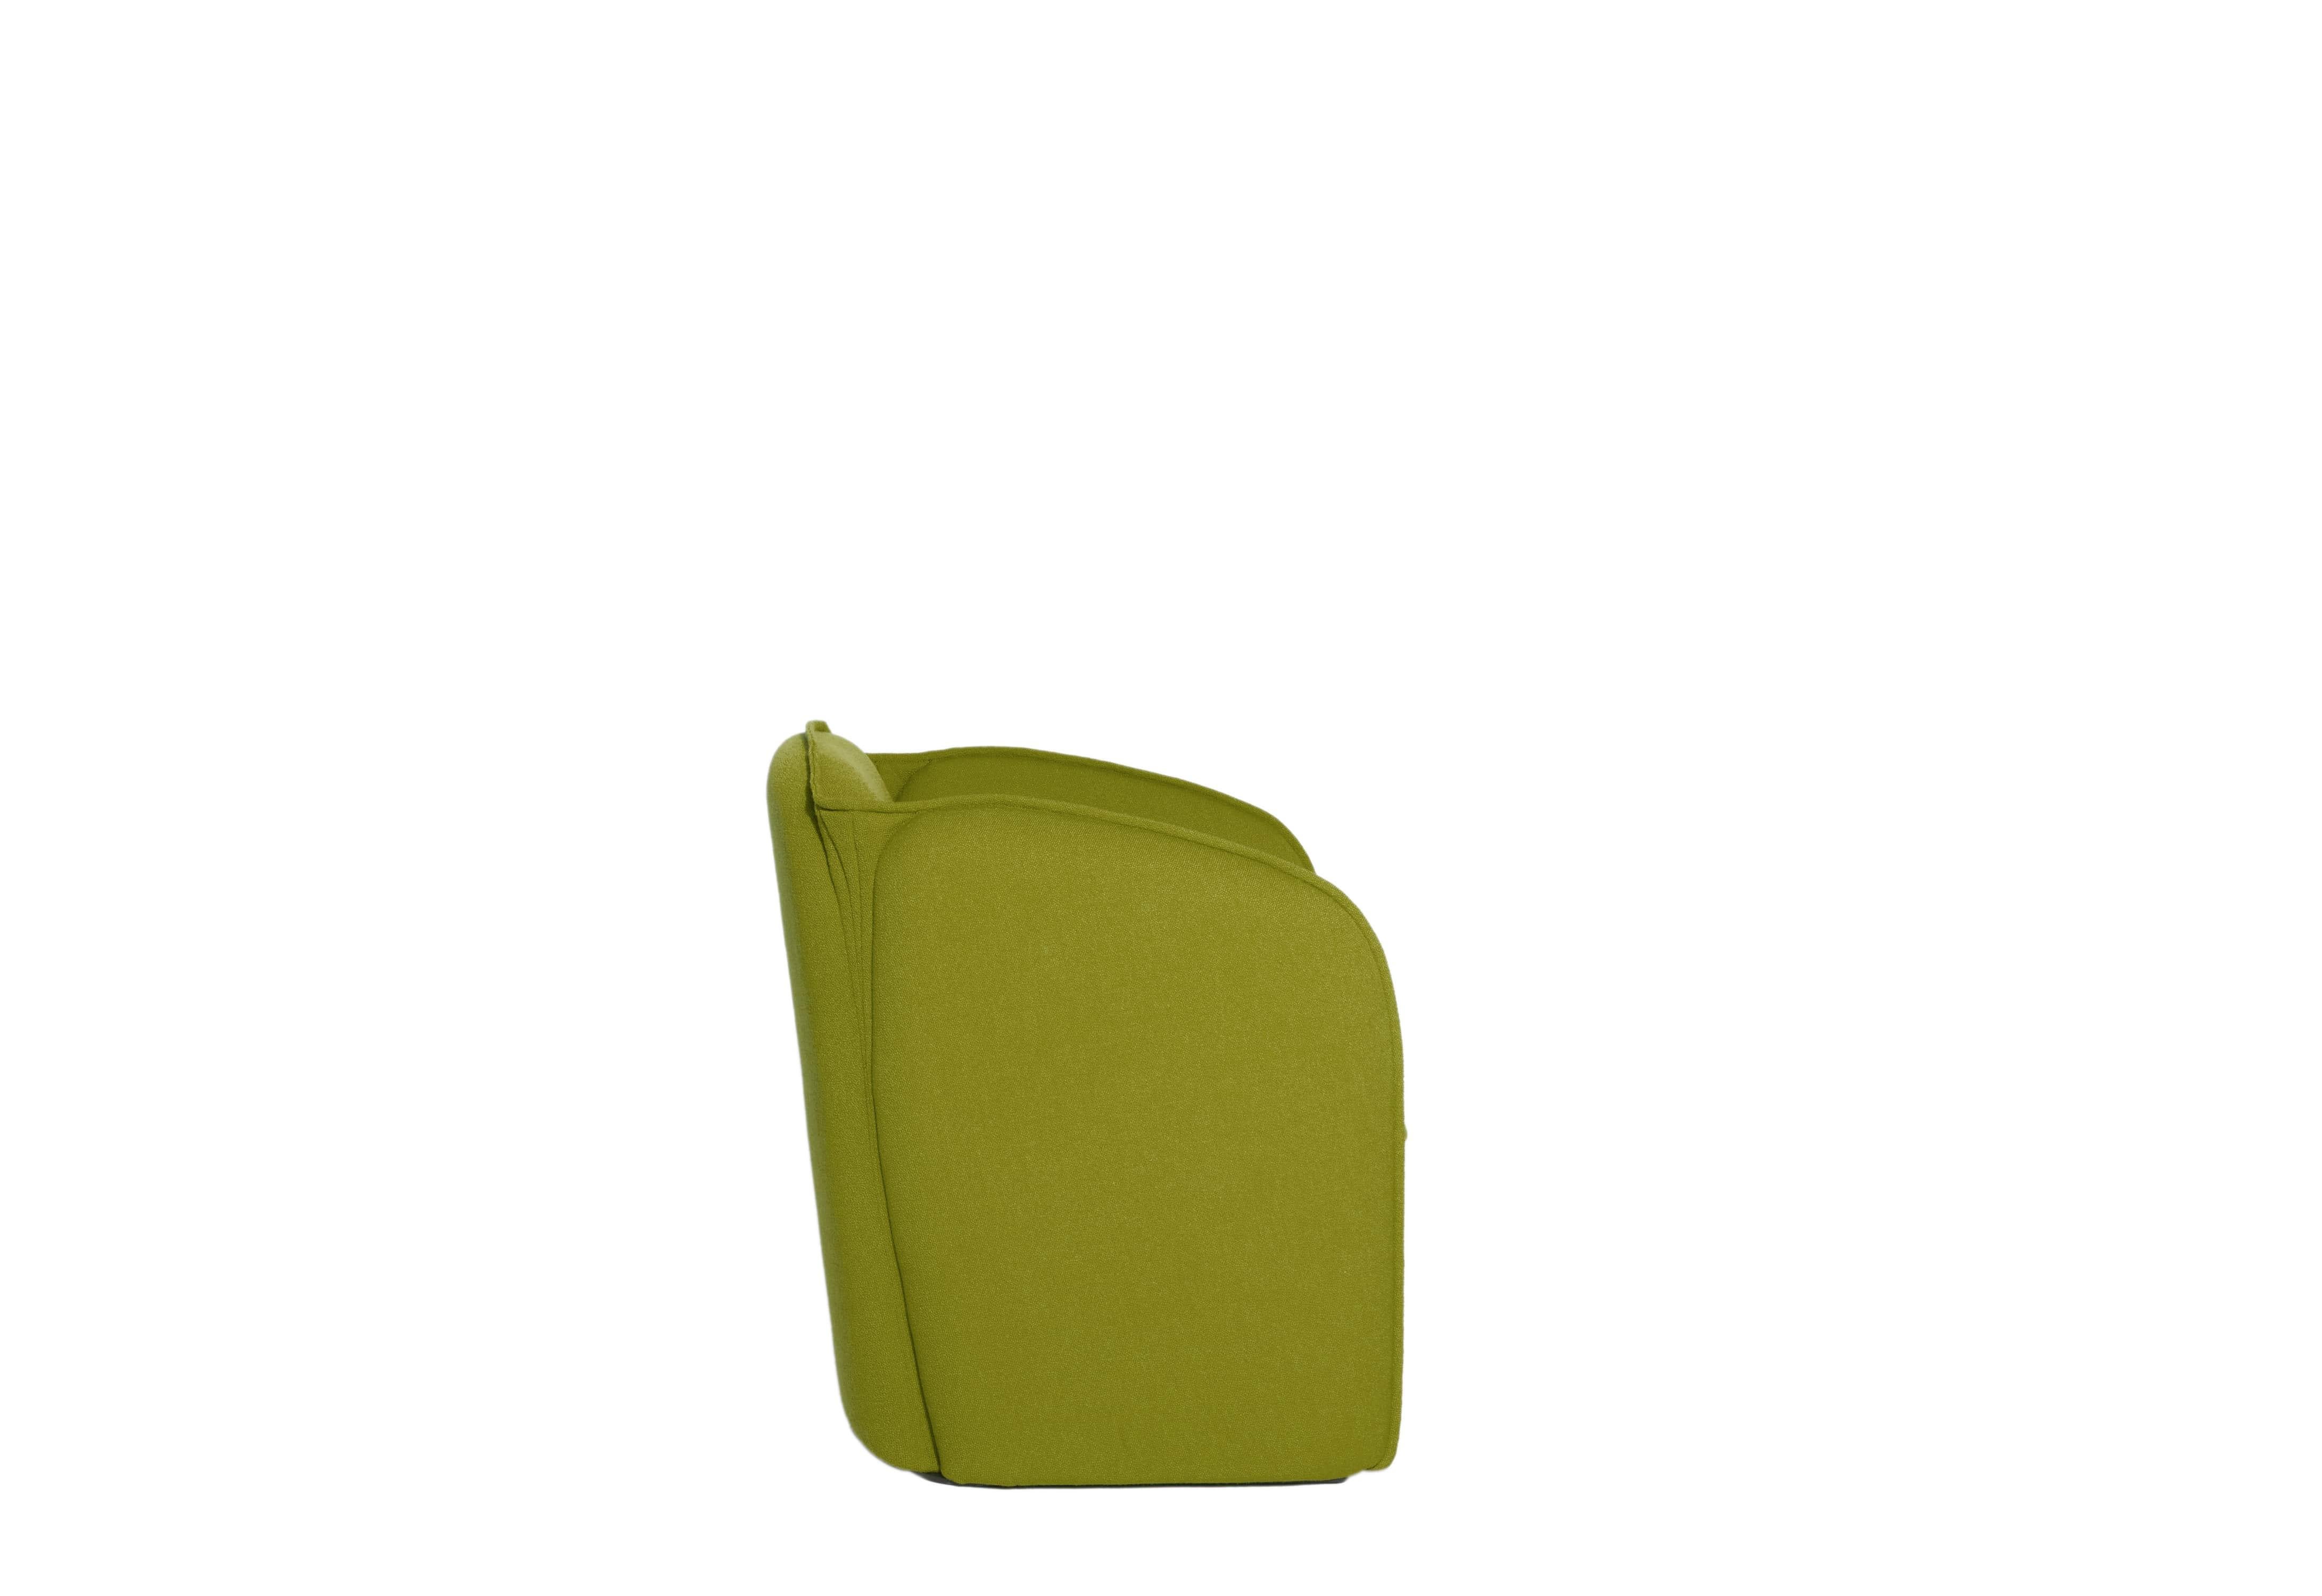 Petite Friture Lily Armchair in Olive Green by Färg & Blanche, 2022 For Sale 1